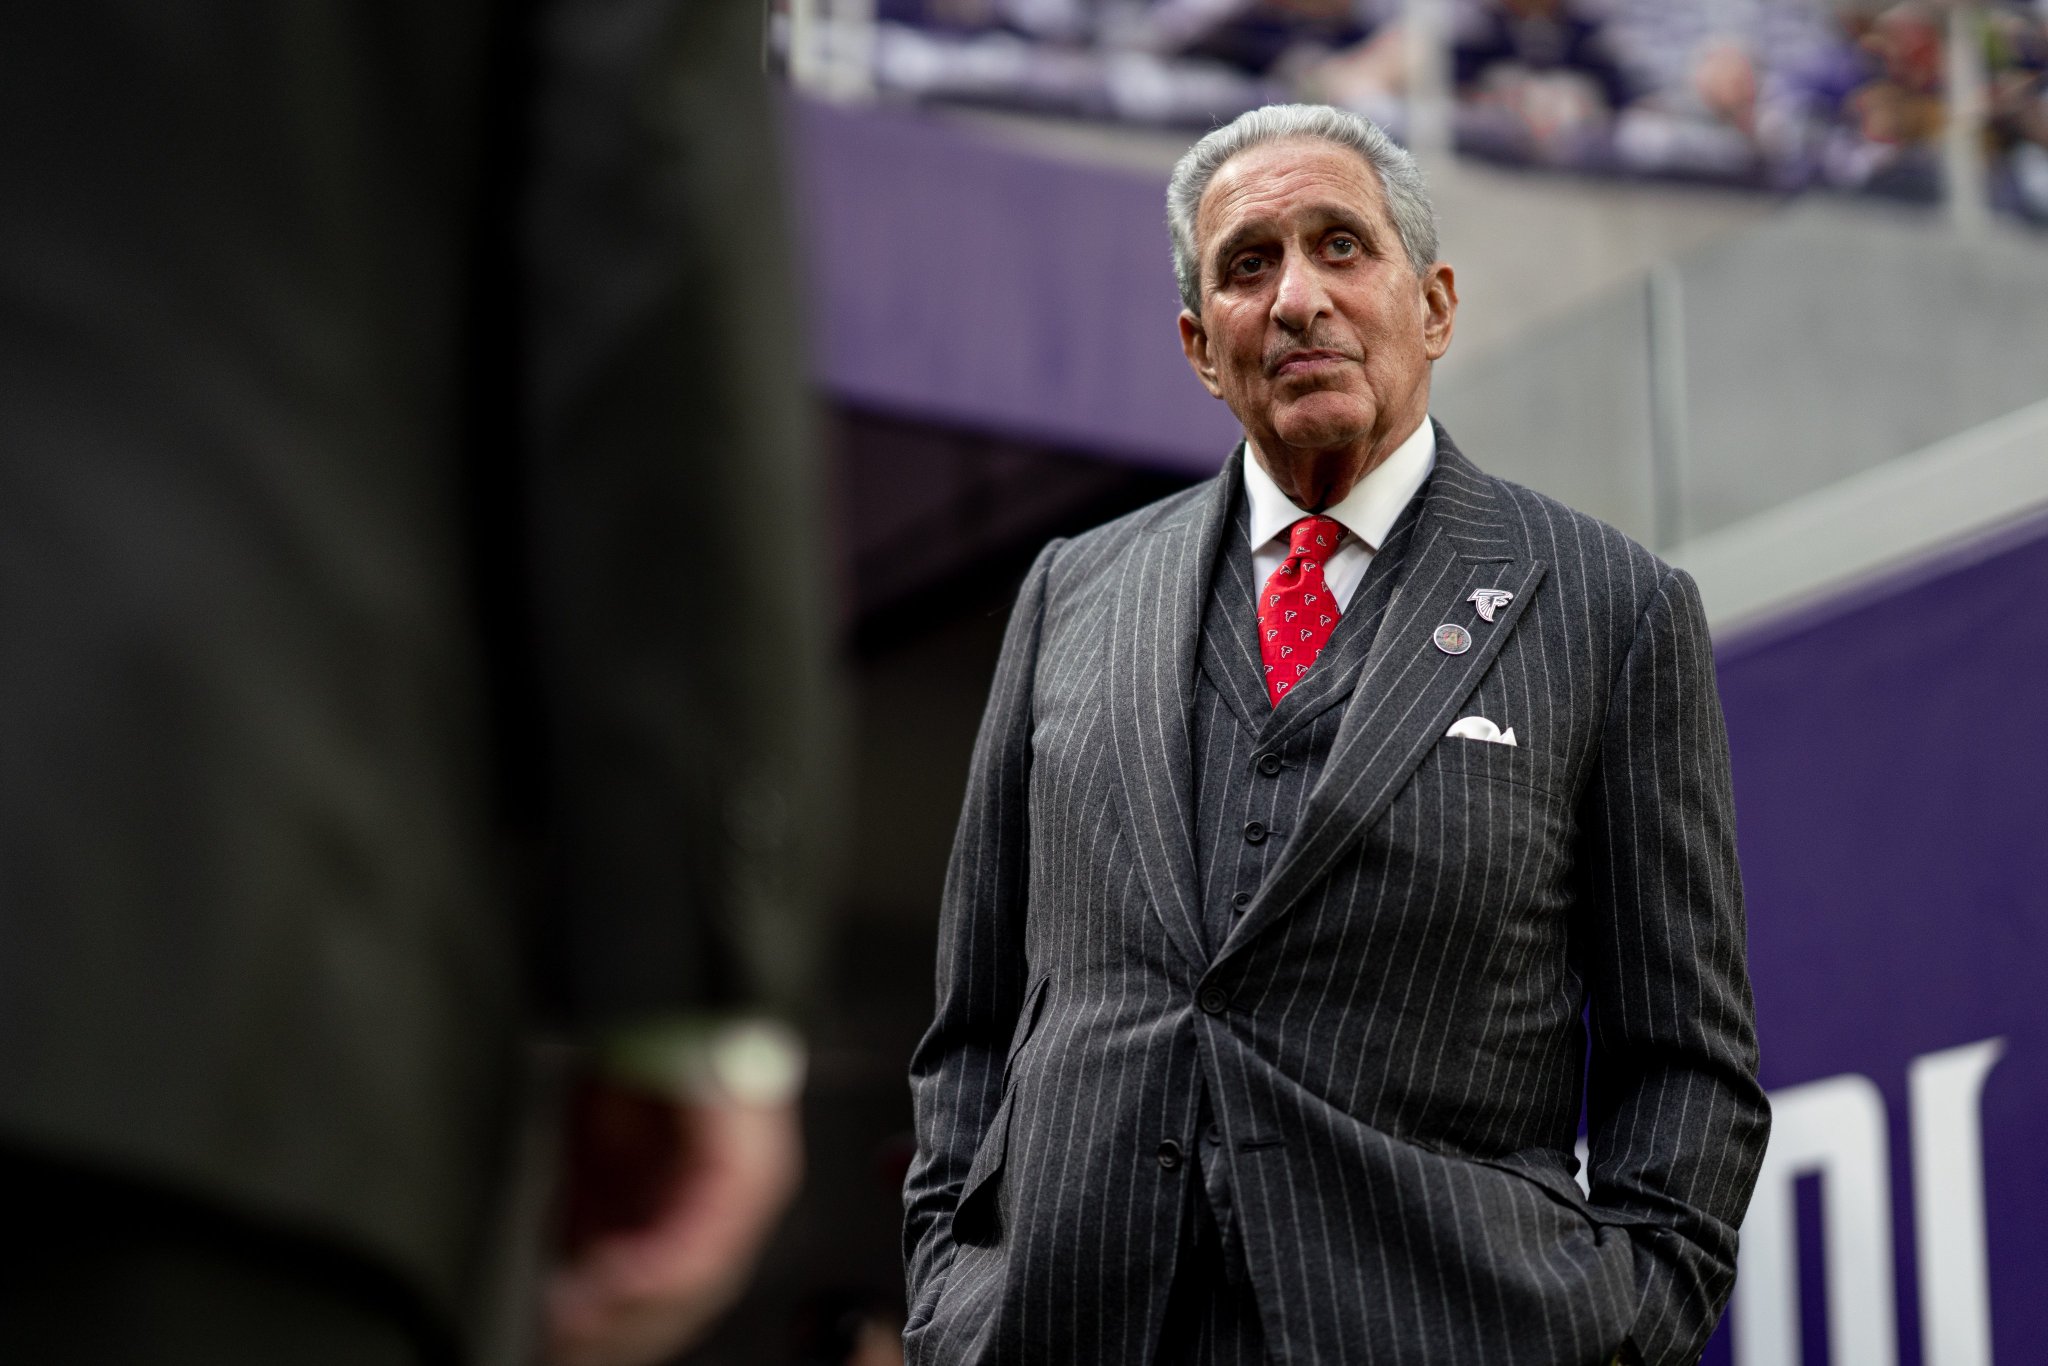 Wishing a very happy birthday to our chairman, Arthur Blank! 